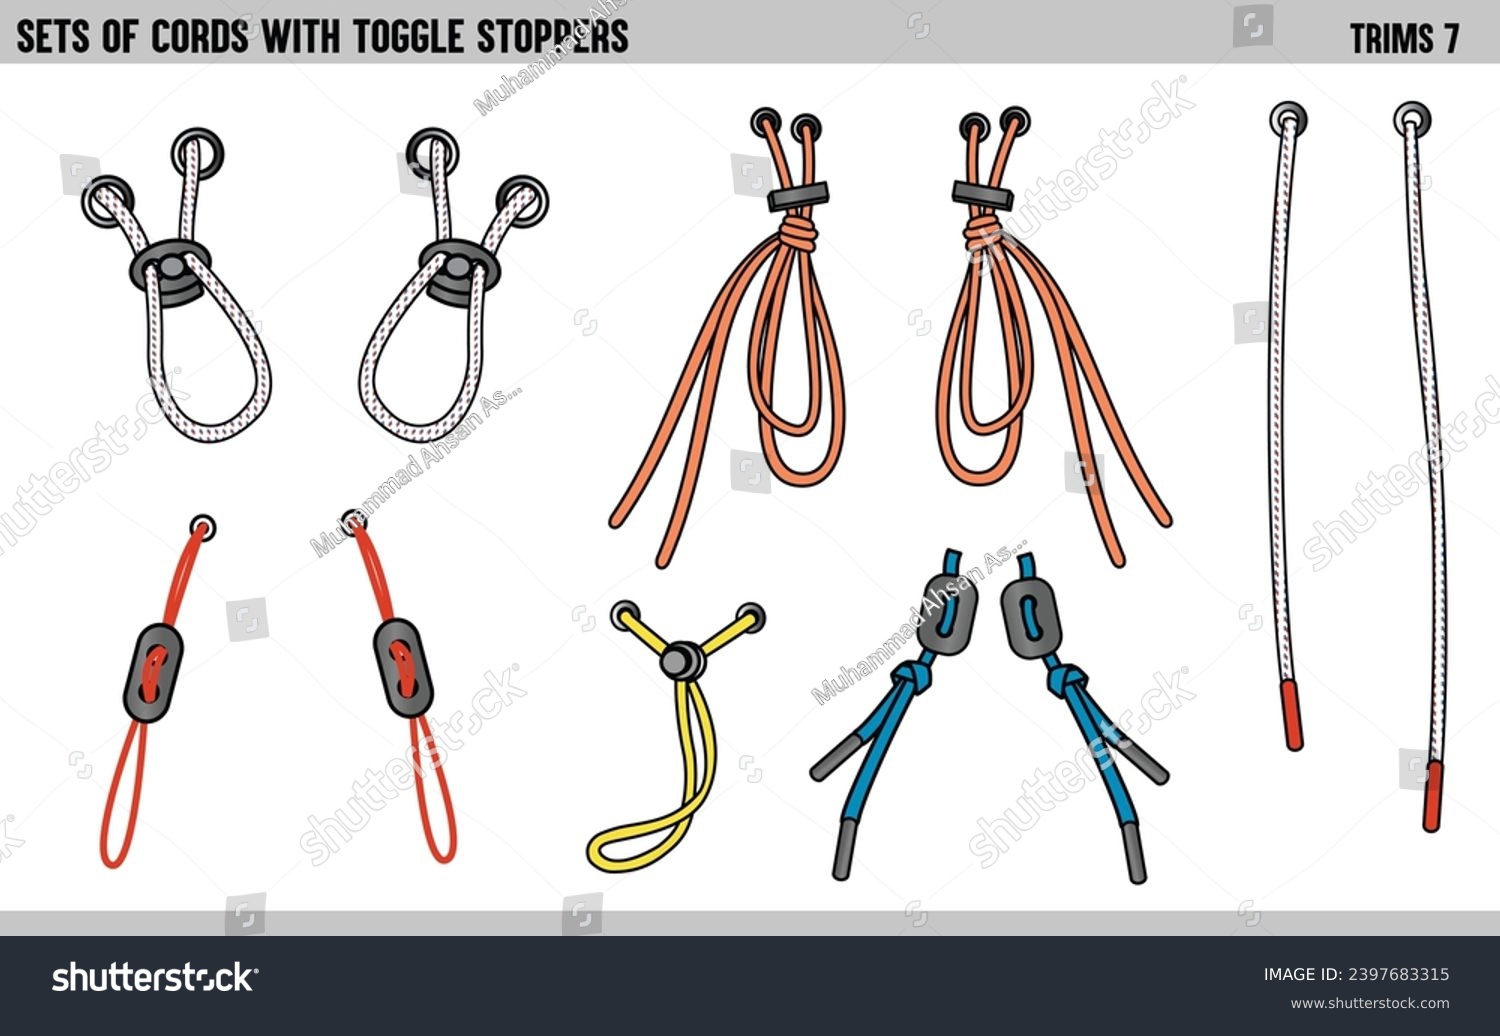 SET OF CORDS WITH TOGGLE STOPPERS FOR WAIST BAND, BAGS, SHOES, JACKETS, SHORTS, PANTS, DRESS GARMENTS, DRAWCORD AGLETS FOR CLOTHING AND ACCESSORIES VECTOR ILLUSTRATION